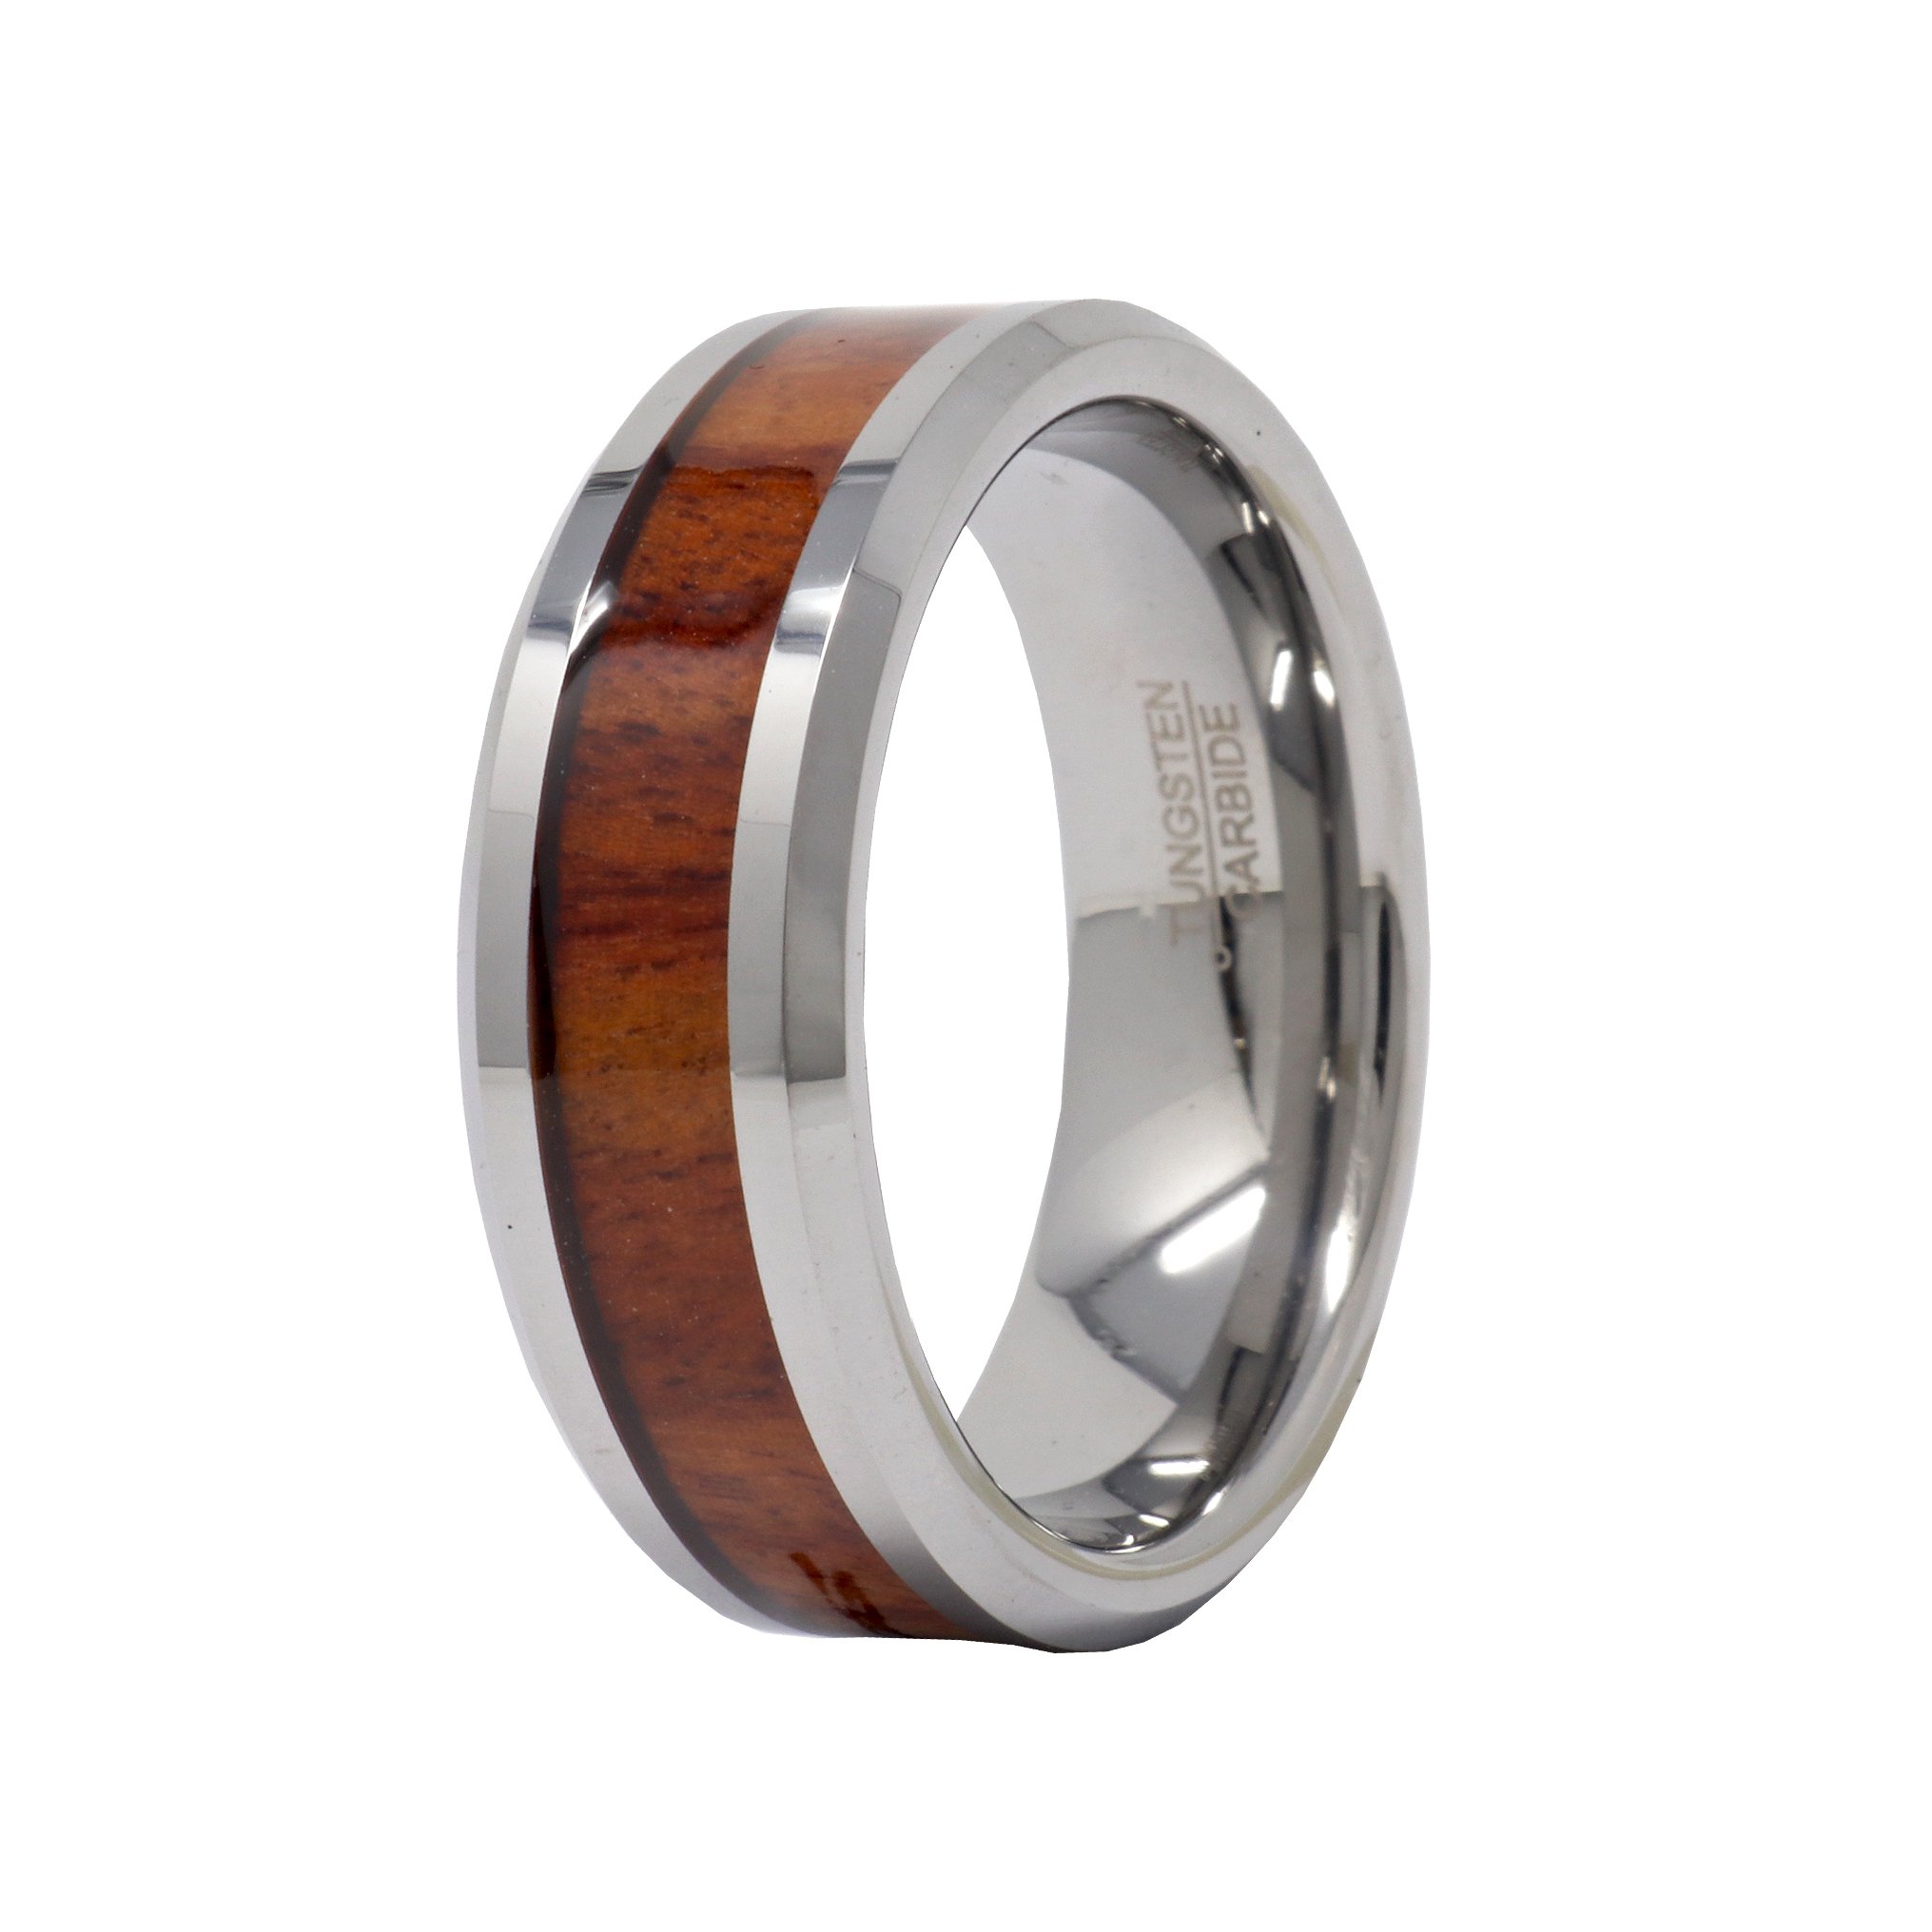 Tungsten Ring Size 8.5 - 8mm High Polished With Mahogany Wood Center